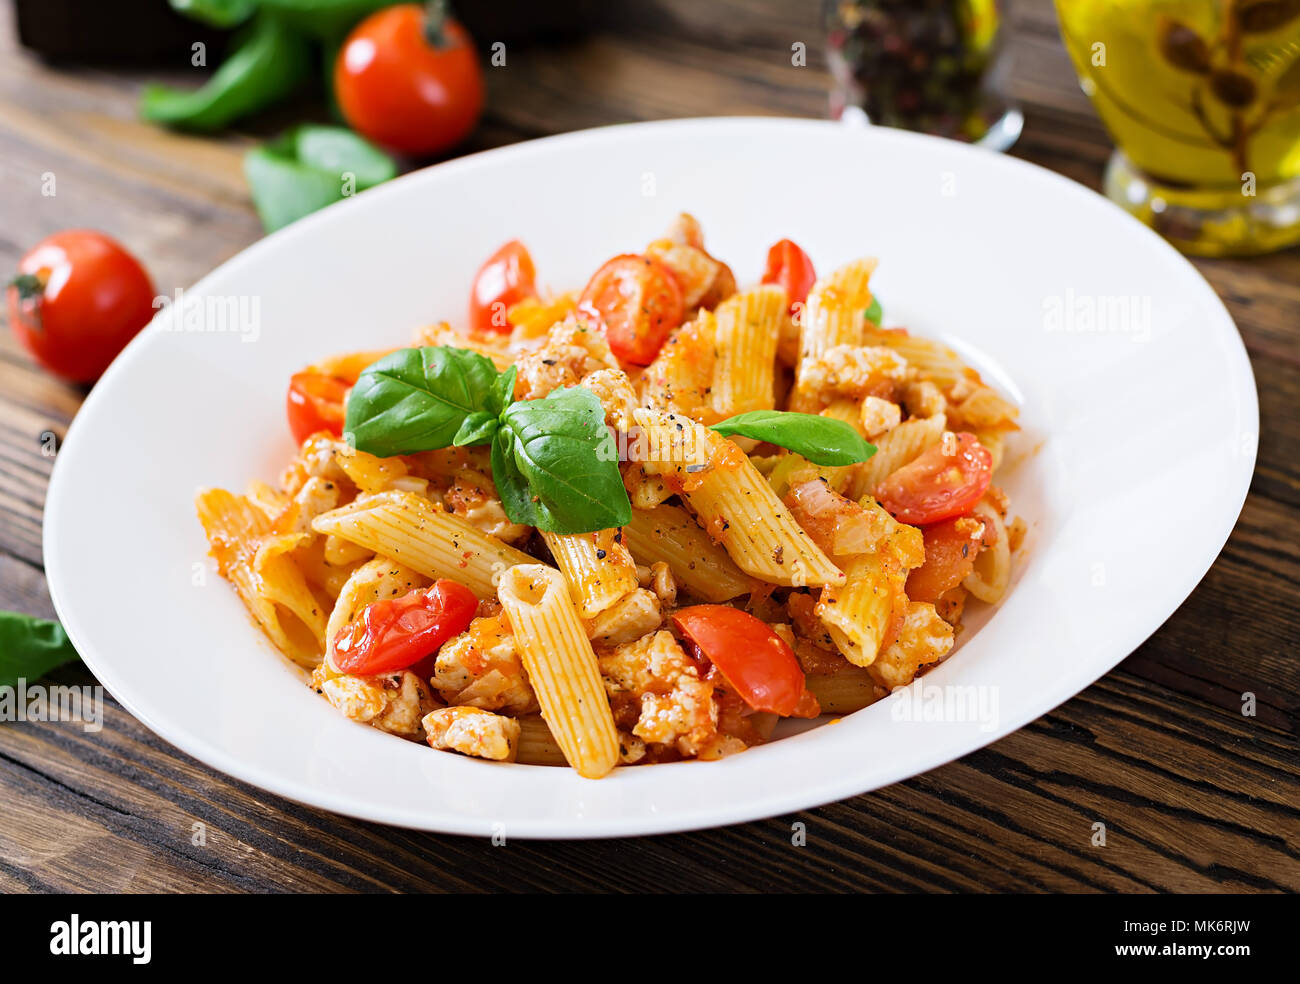 Penne pasta in tomato sauce with chicken, tomatoes, decorated with basil on a wooden table. Italian food. Pasta Bolognese. Stock Photo